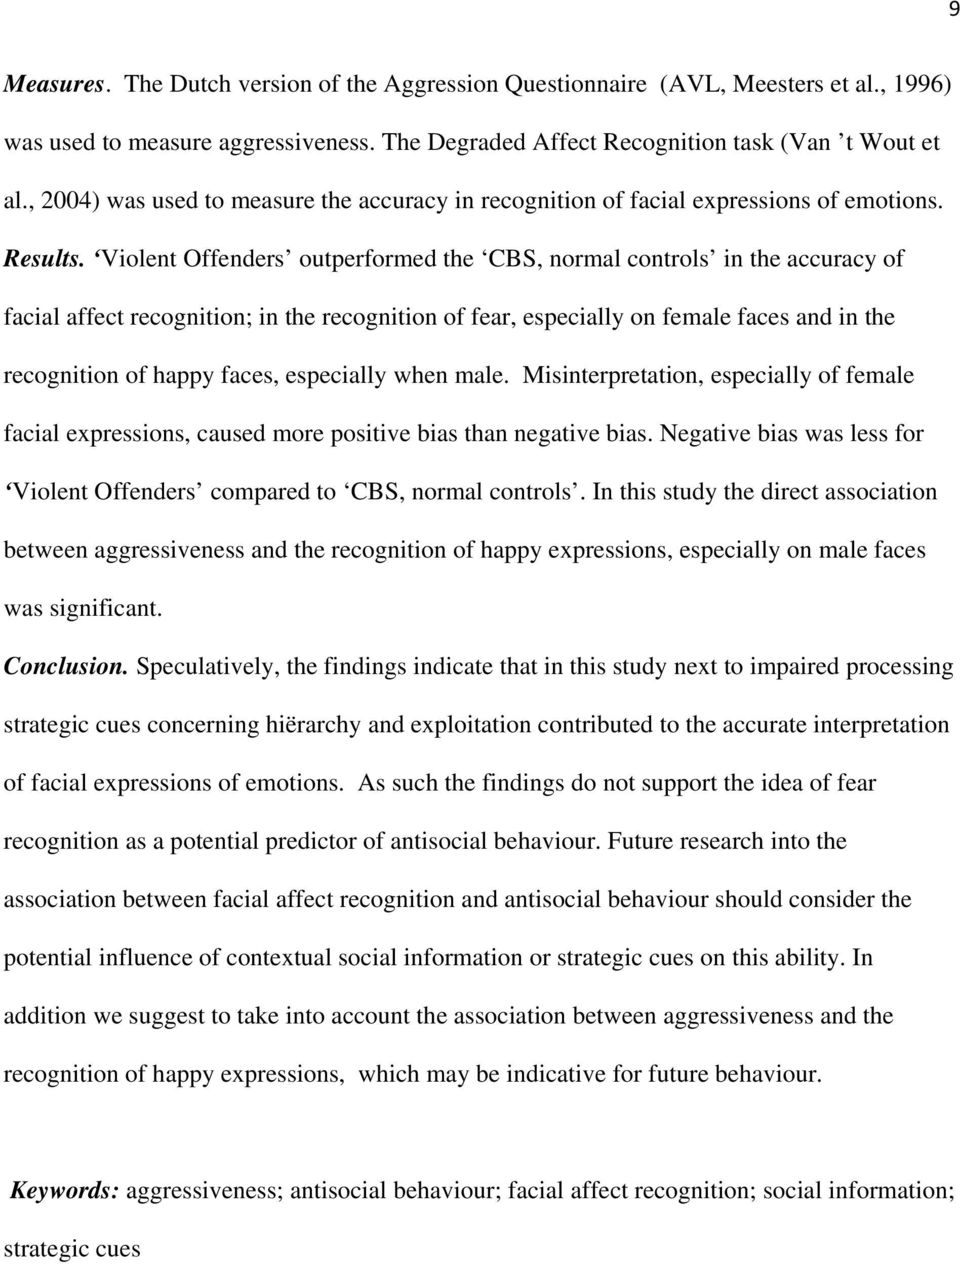 Violent Offenders outperformed the CBS, normal controls in the accuracy of facial affect recognition; in the recognition of fear, especially on female faces and in the recognition of happy faces,